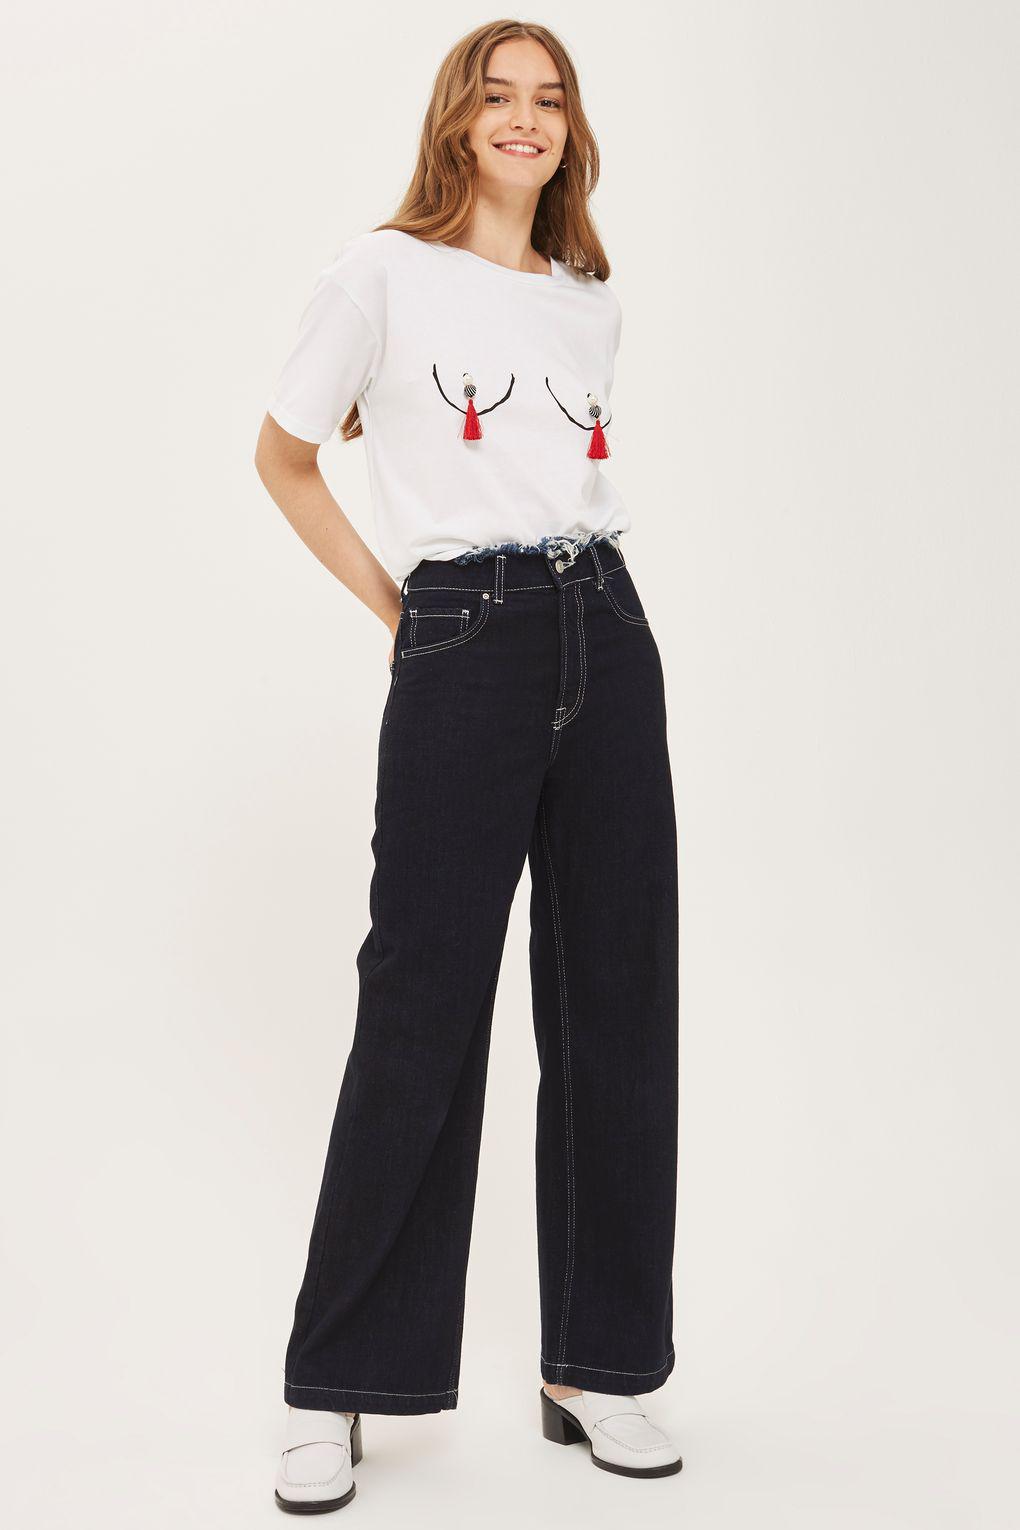 Never Fully Dressed Cotton &#39;tassel Boob&#39; Graphic Tee By Never Fully Dressed in White - Lyst